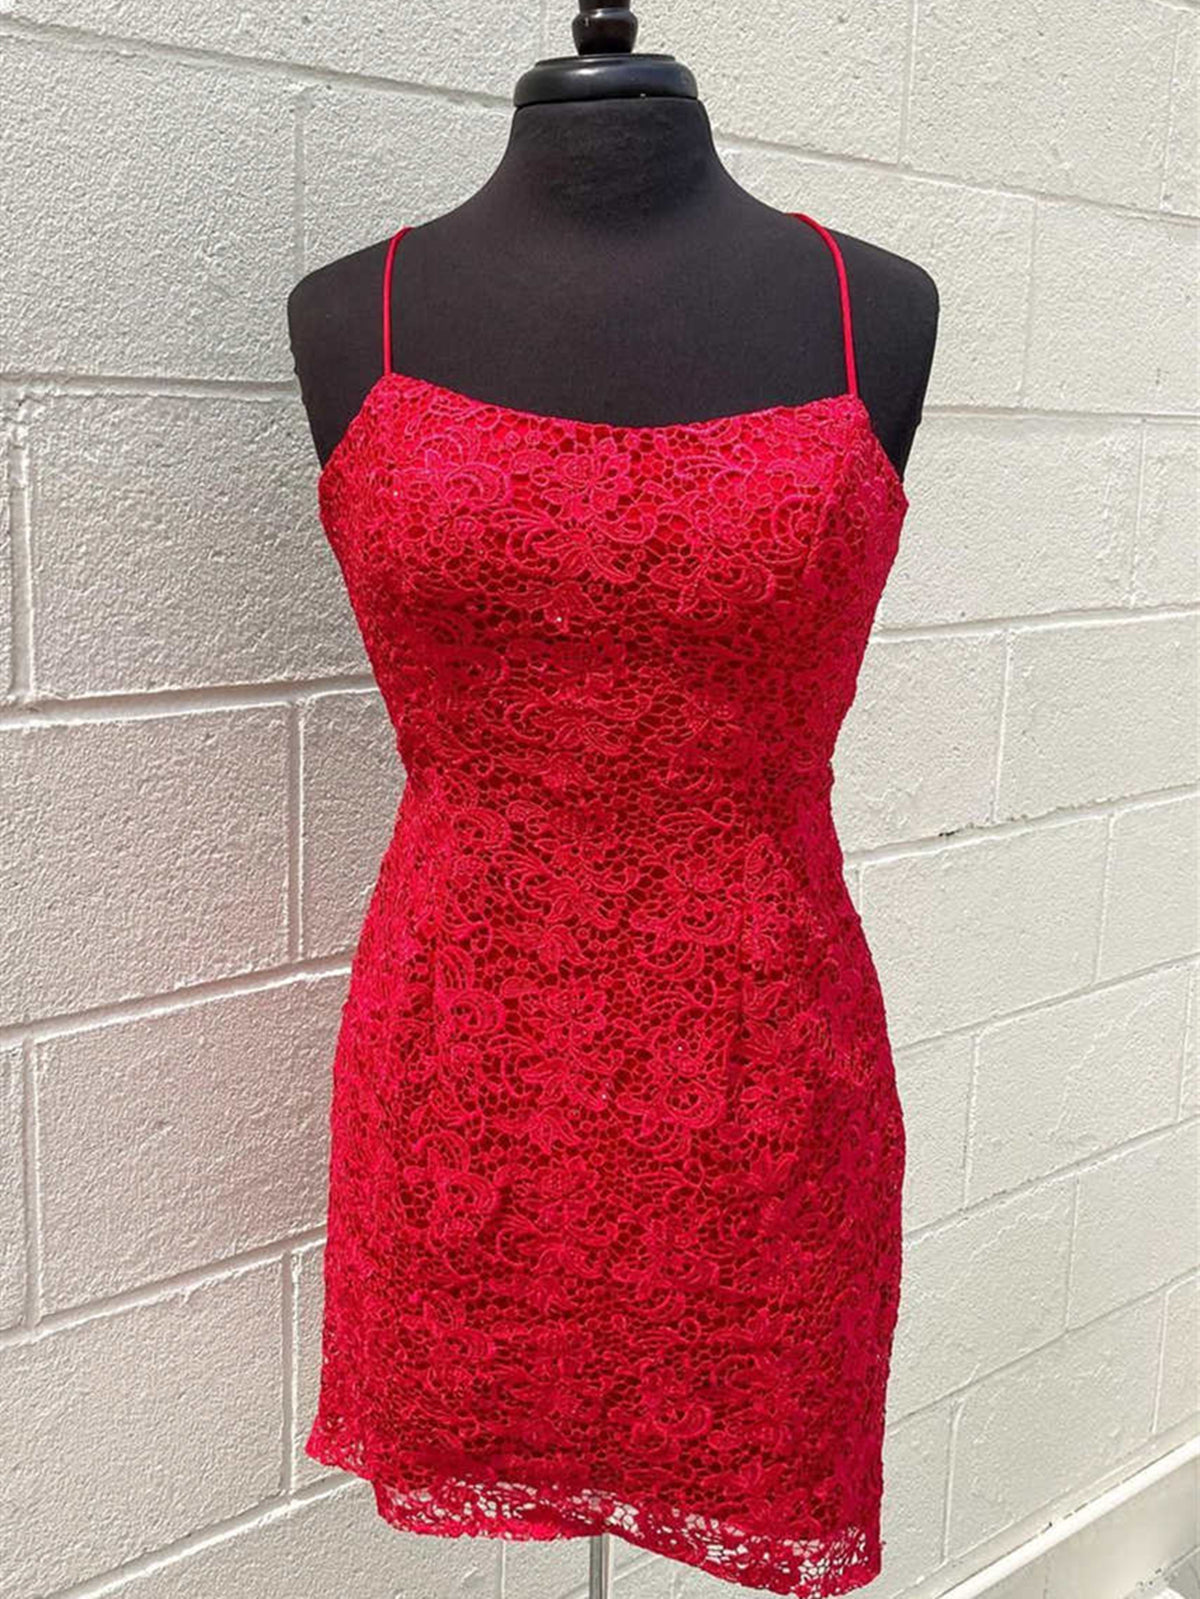 Short Backless Red Lace Prom Dresses For Black girls For Women, Open Back Short Red Lace Formal Homecoming Dresses